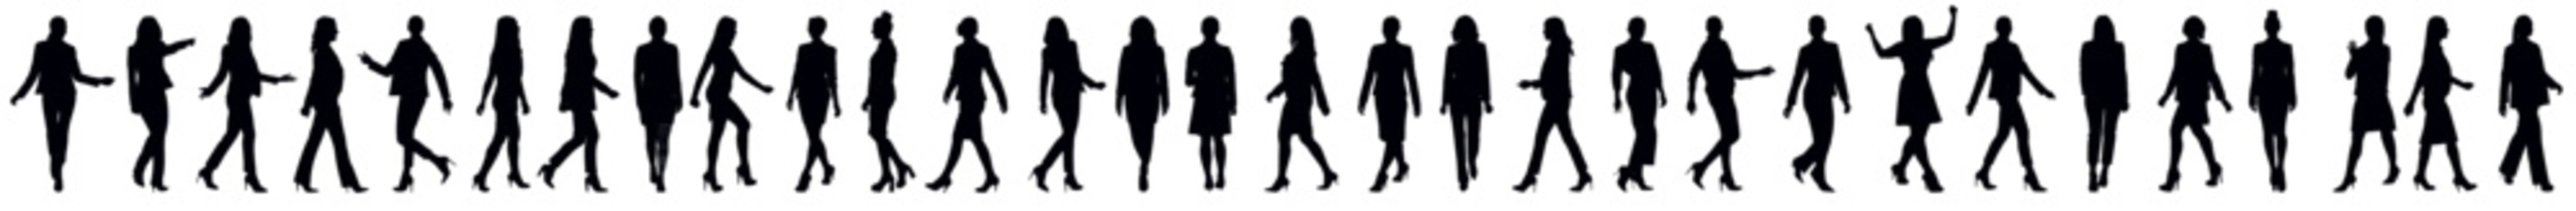 Set of business people silhouette, collection of female silhouette isolated on white background